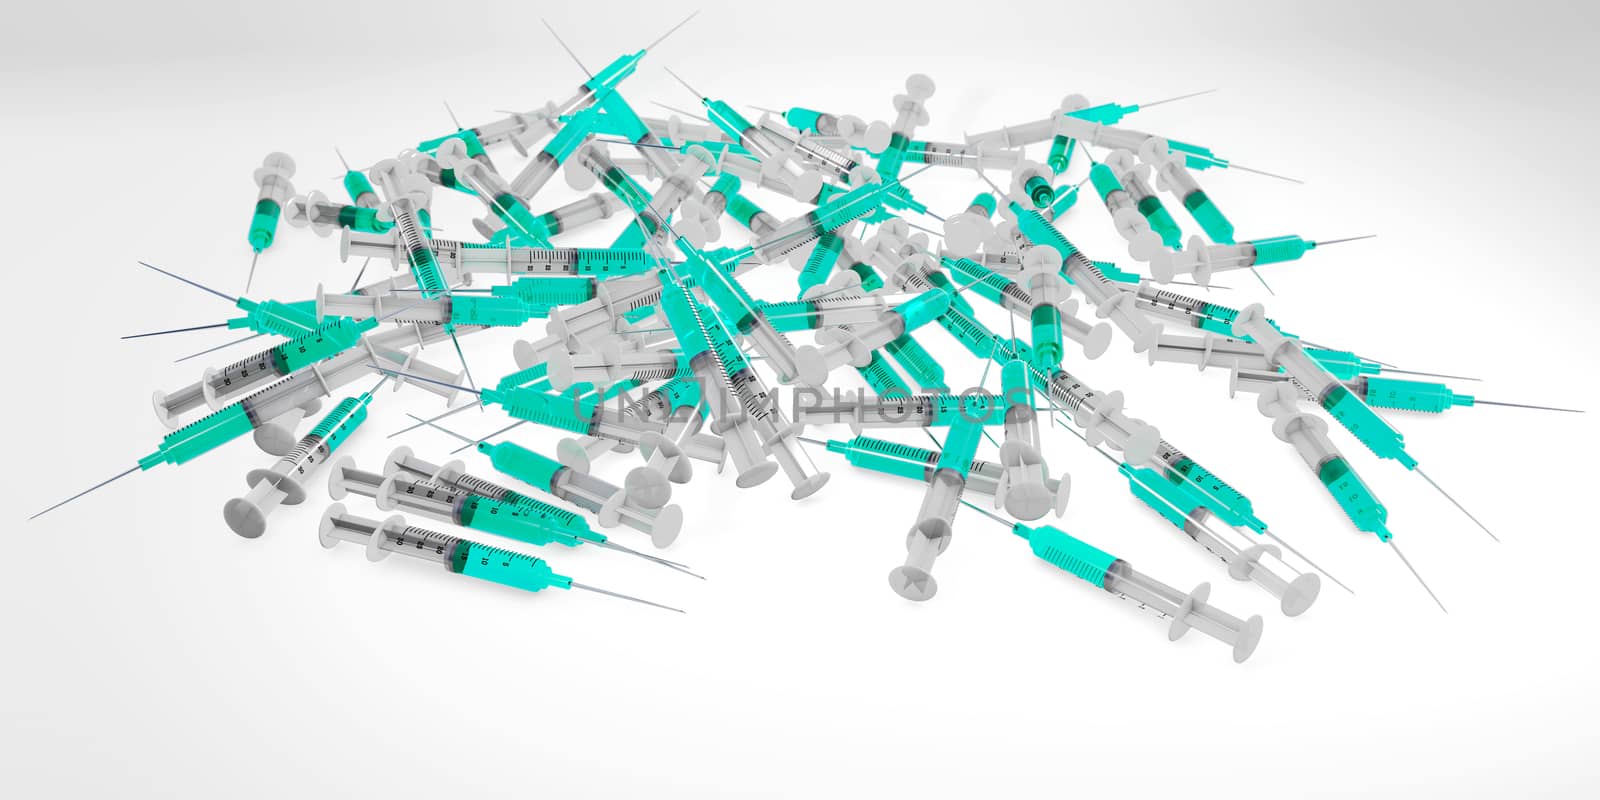 syringes scattered 3d rendering vaccine cure concept by F1b0nacci